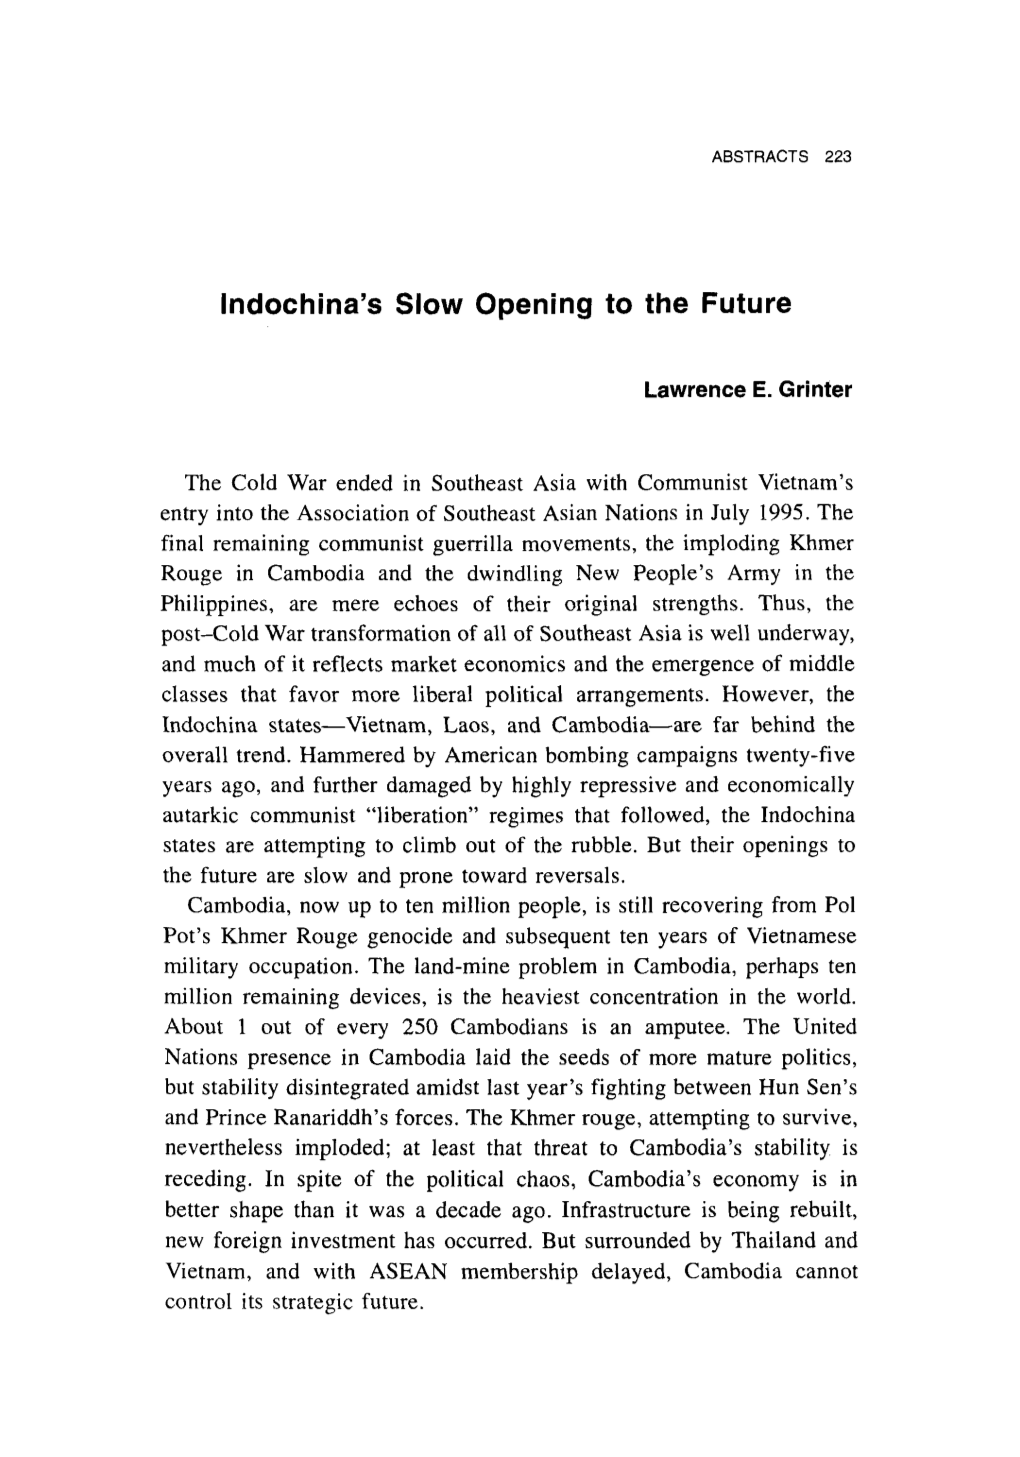 Indochina's Slow Opening to the Future